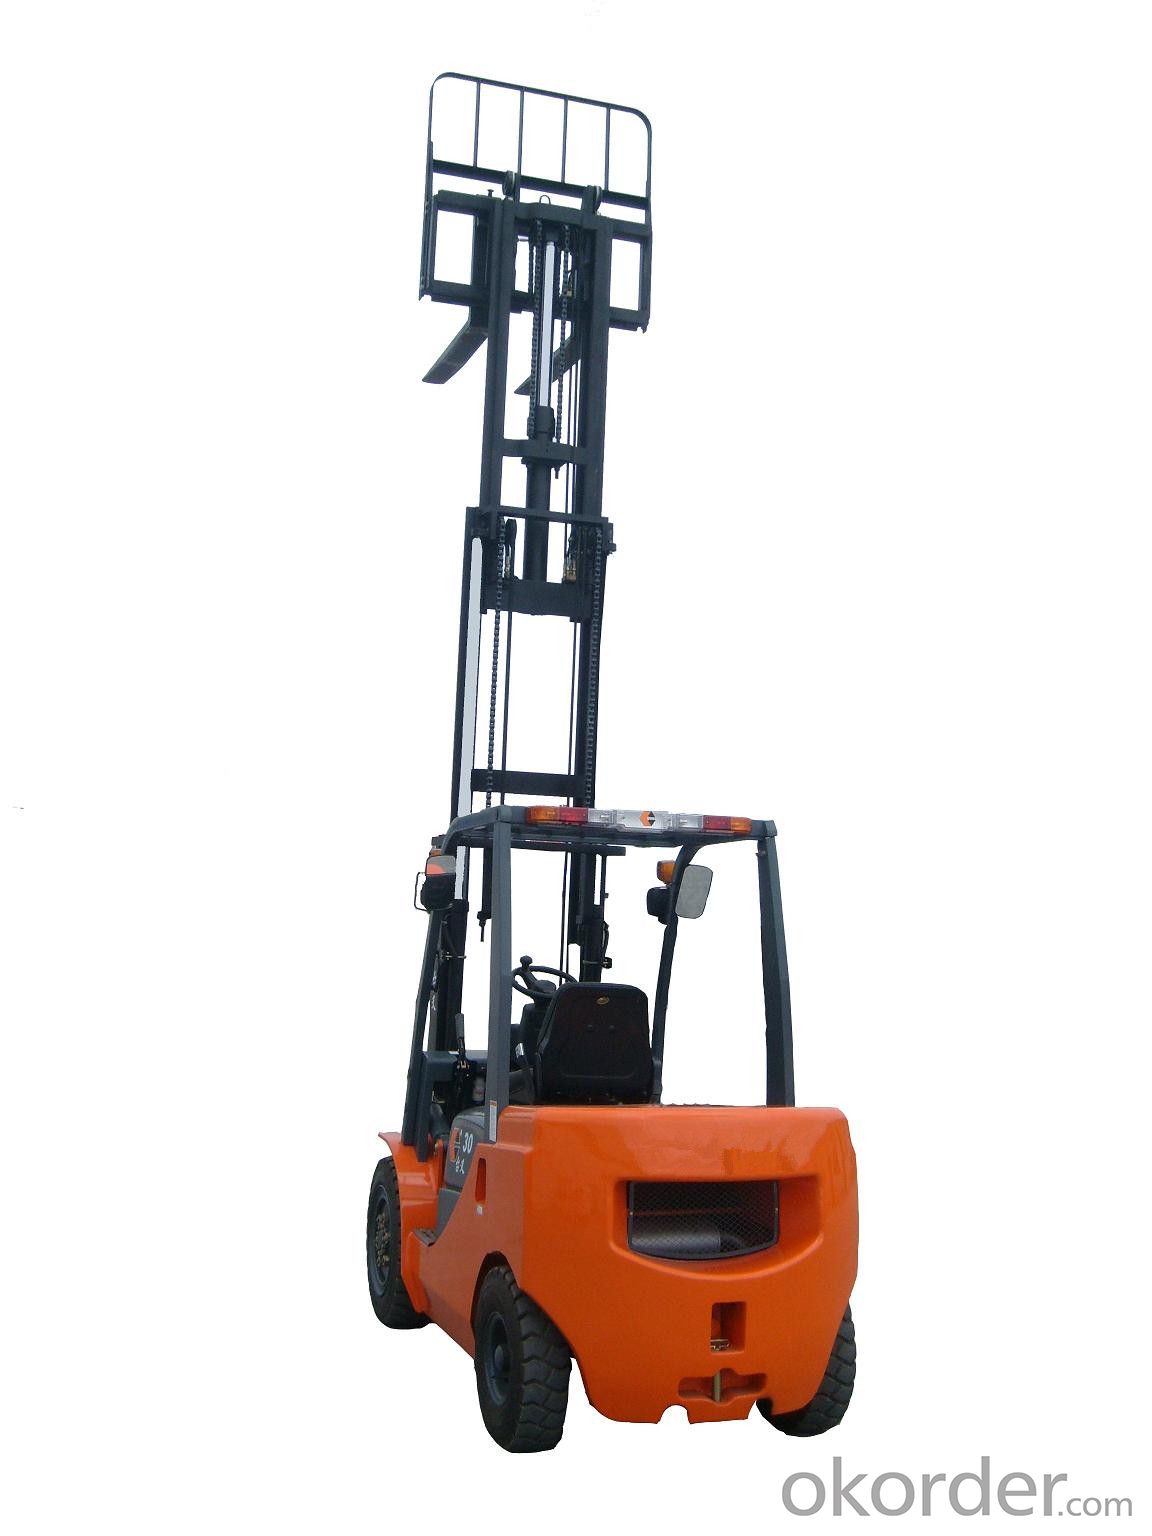 Cheap Electric Forklift For Sale Fd40b C1 Real Time Quotes Last Sale Prices Okorder Com